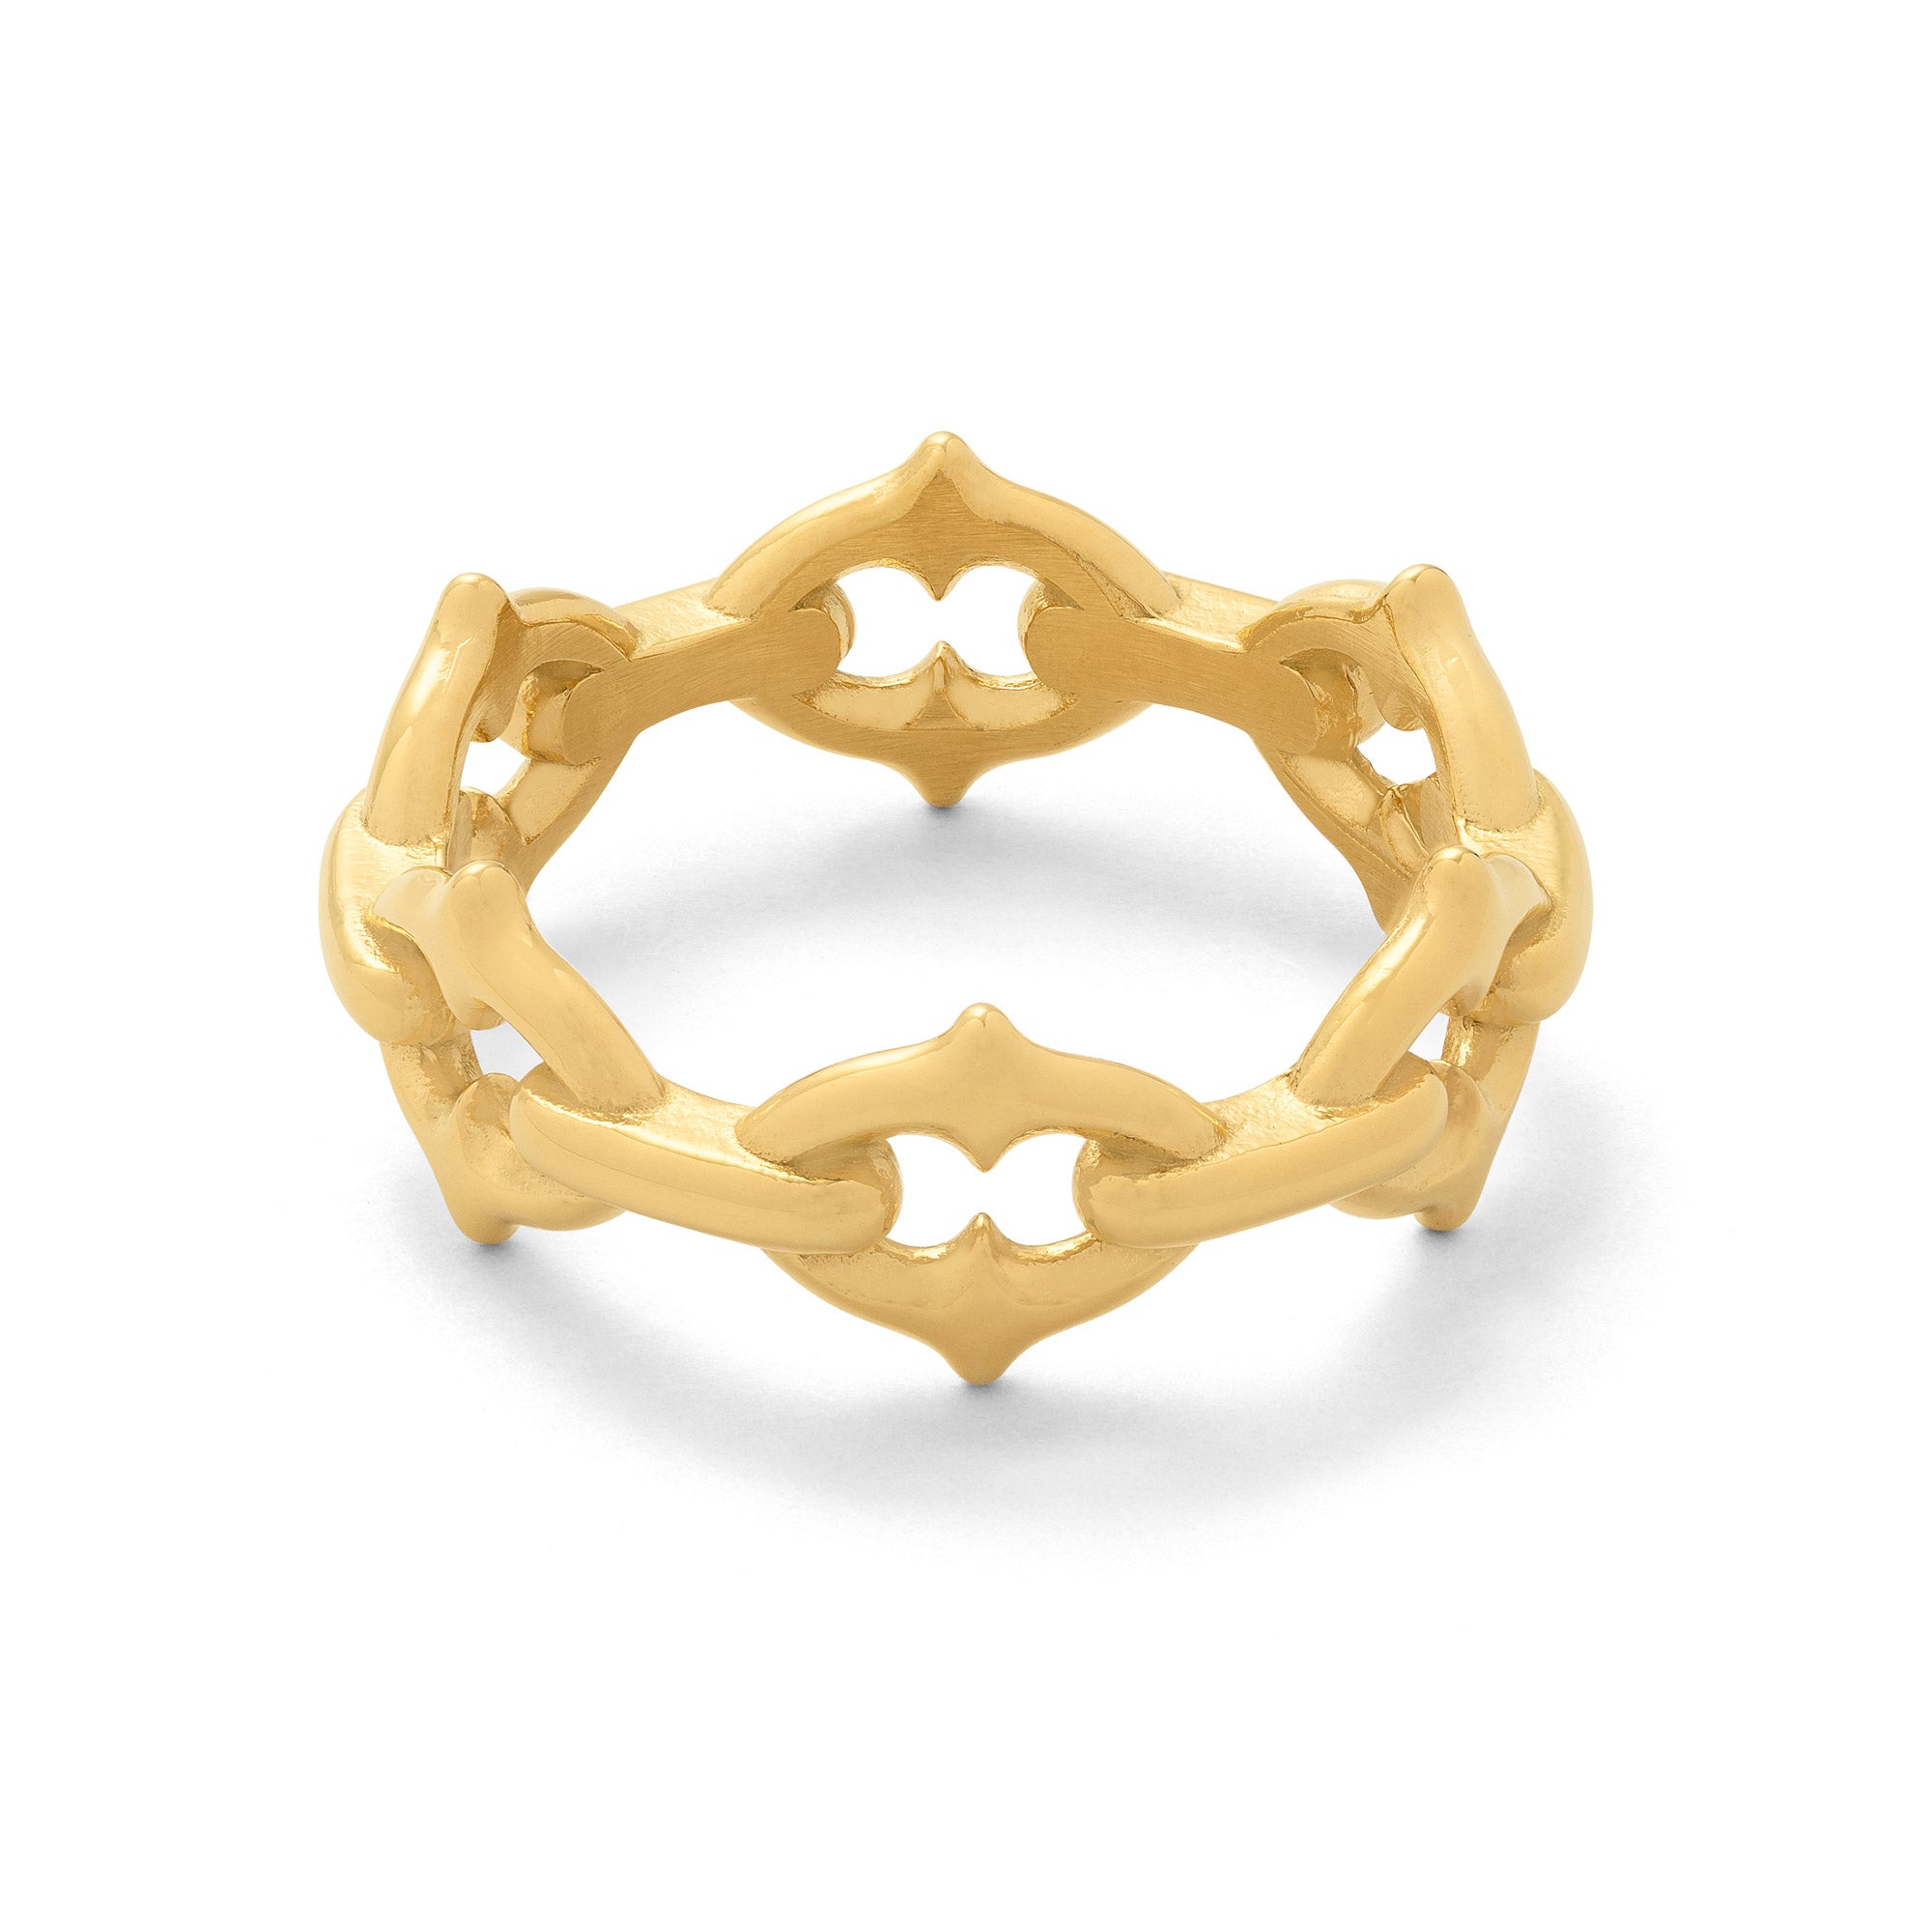 Statement Collective - "The Cathedral" Spiked Link Chain Ring (Gold)